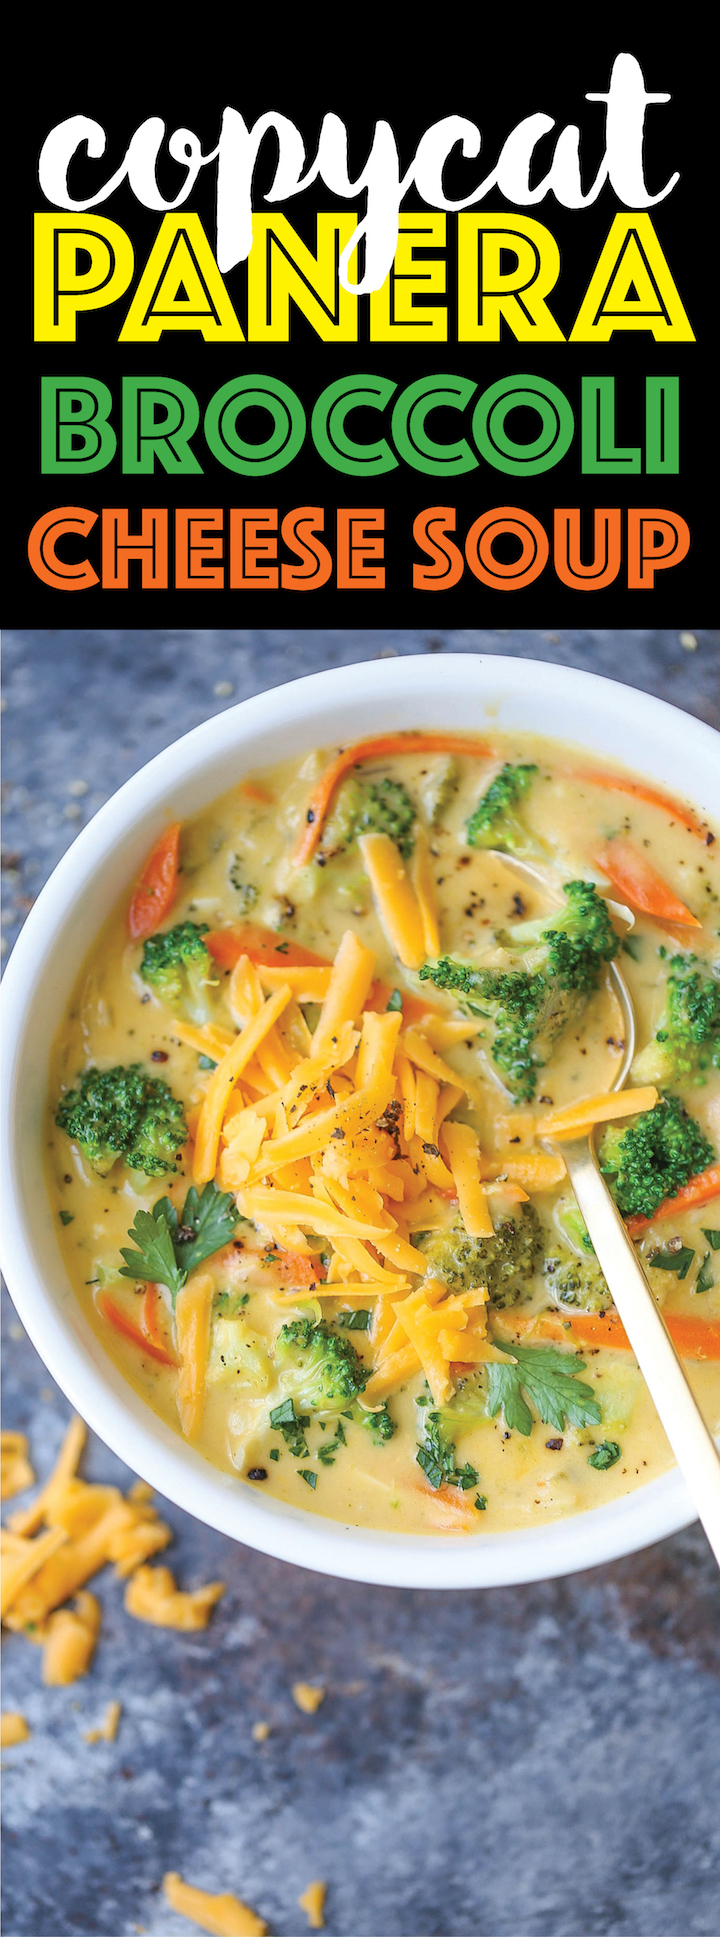 Copycat Panera Broccoli Cheese Soup - Now you can make everyone's favorite broccoli cheese soup right at home - so thick and creamy. It's unbelievably good!